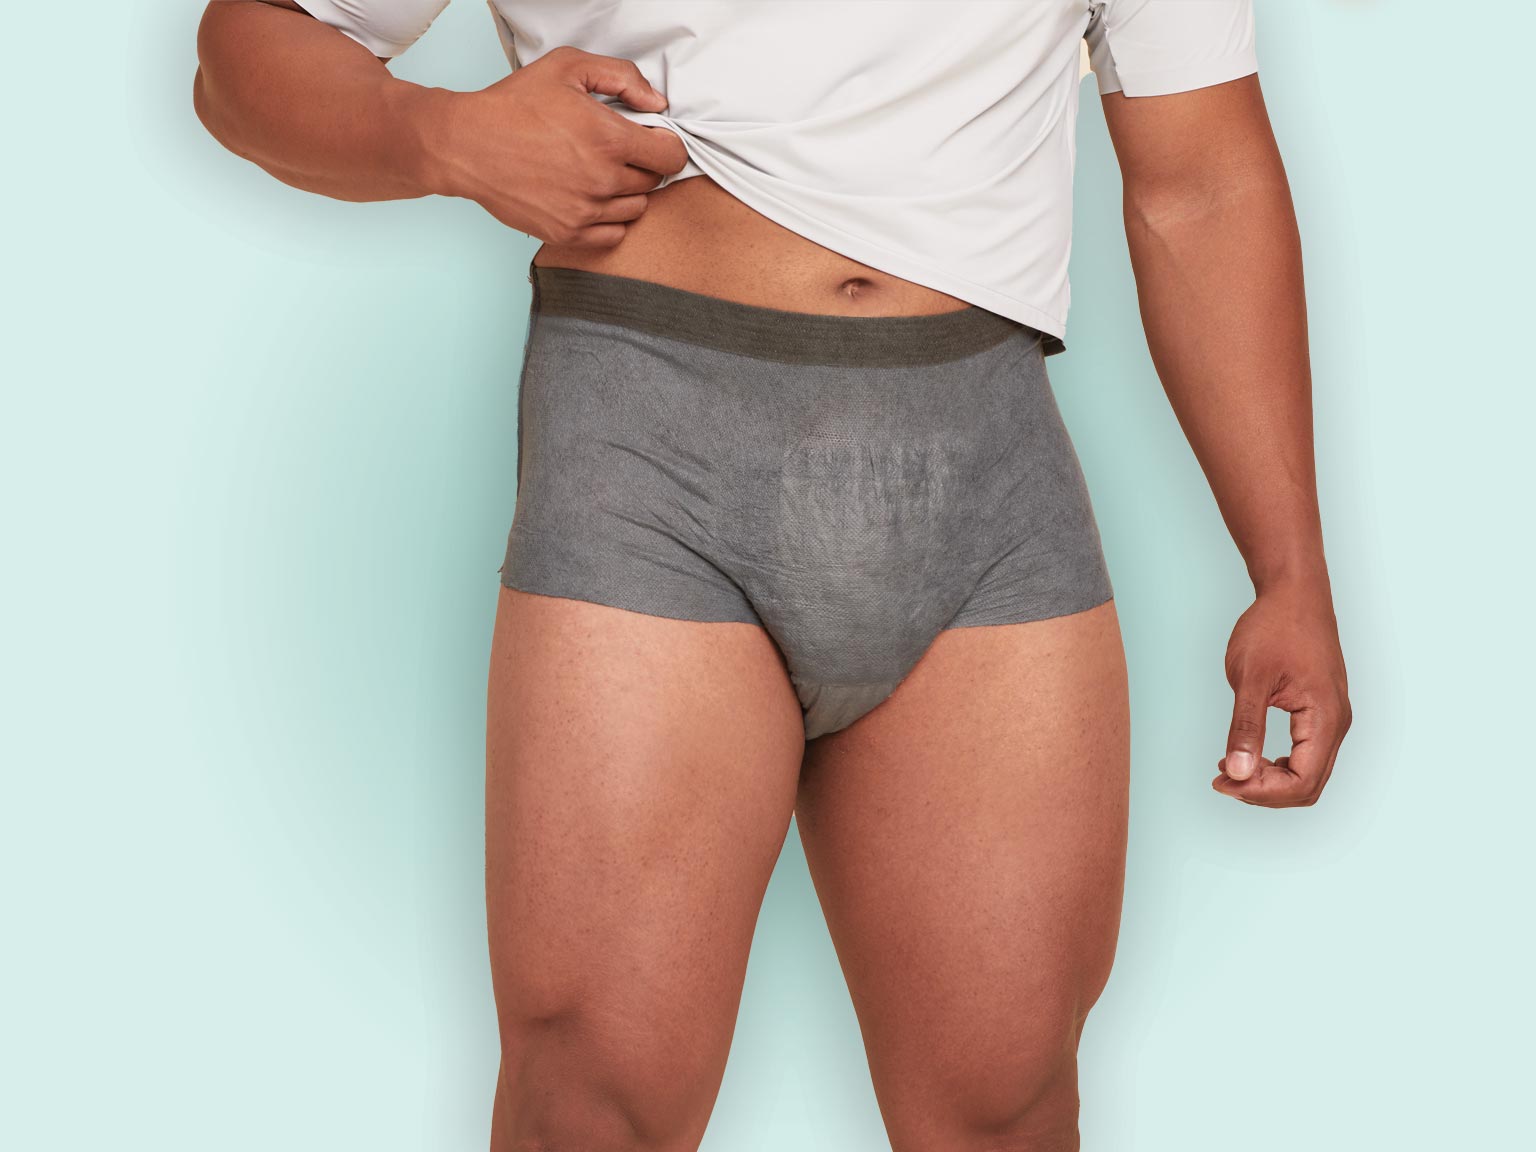 Do men wear thongs? Yes! And here's why…